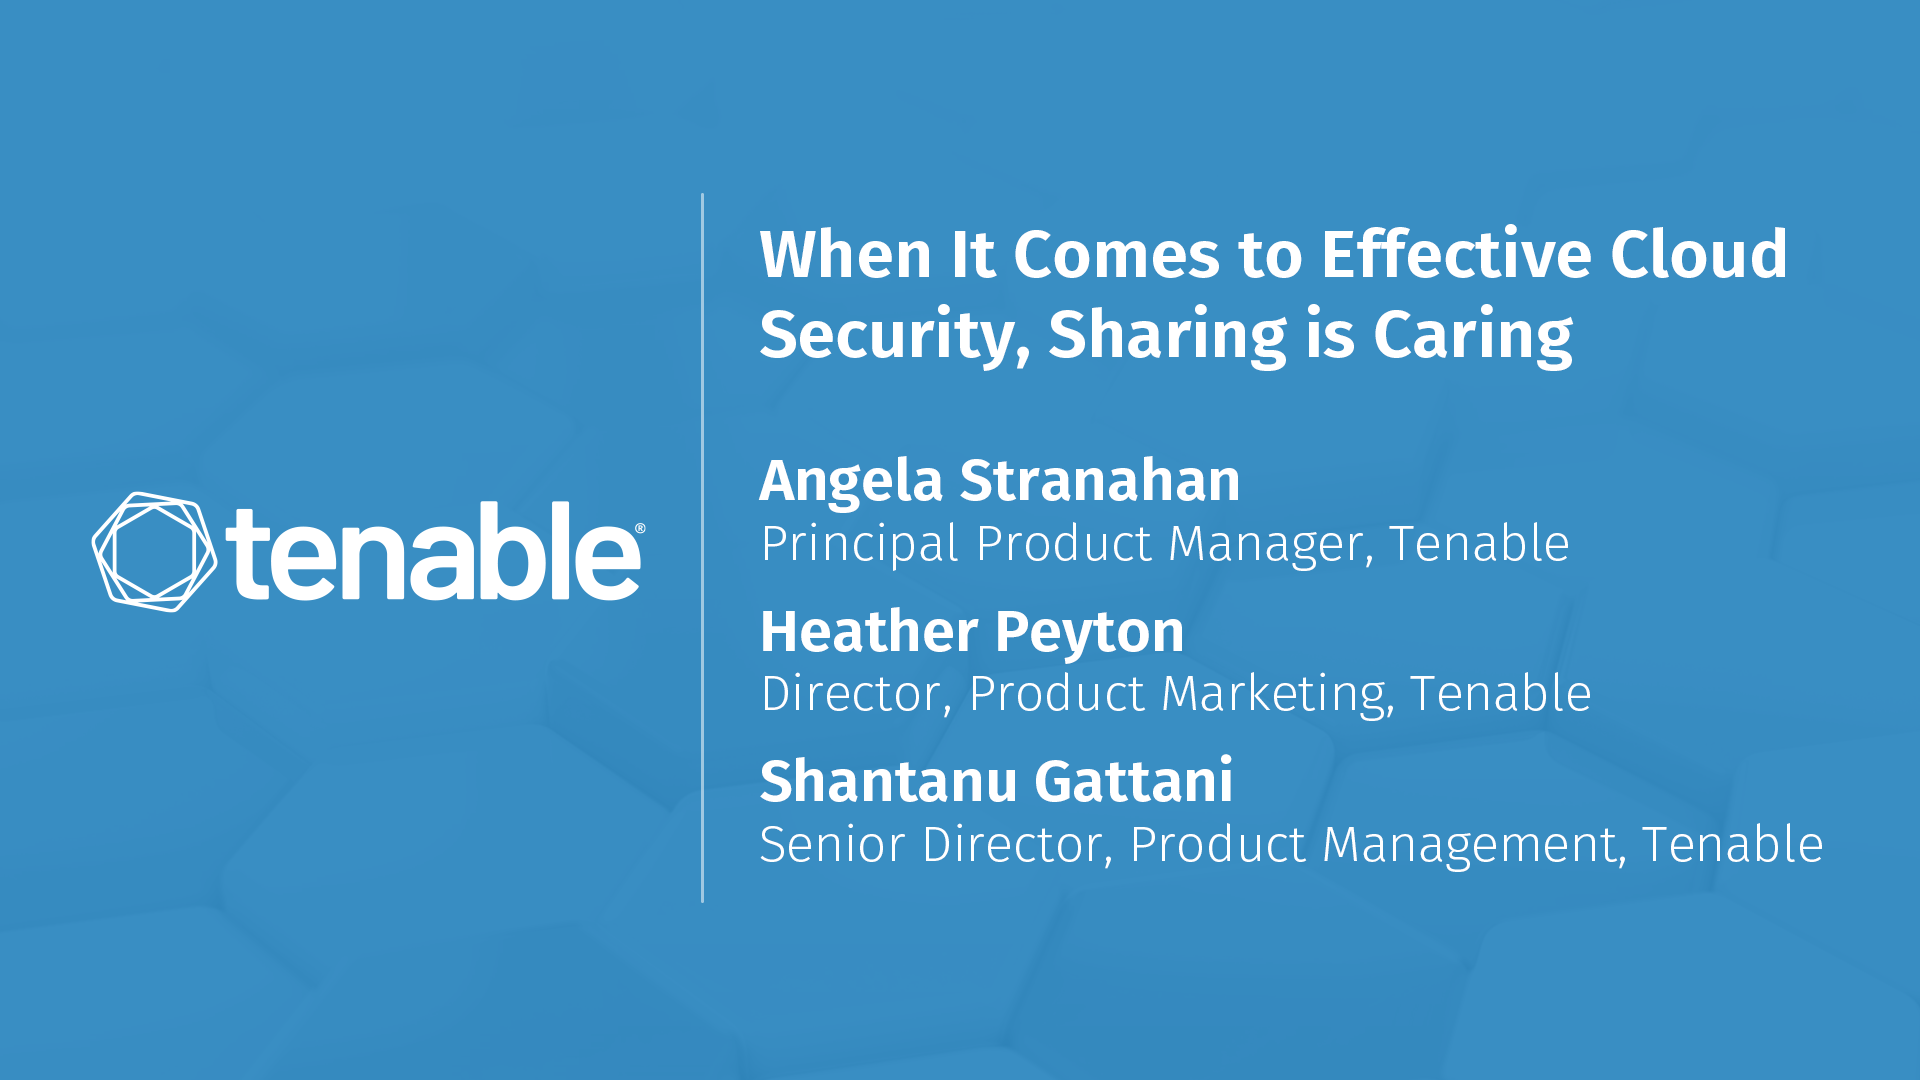 When It Comes to Effective Cloud Security, Sharing is Caring